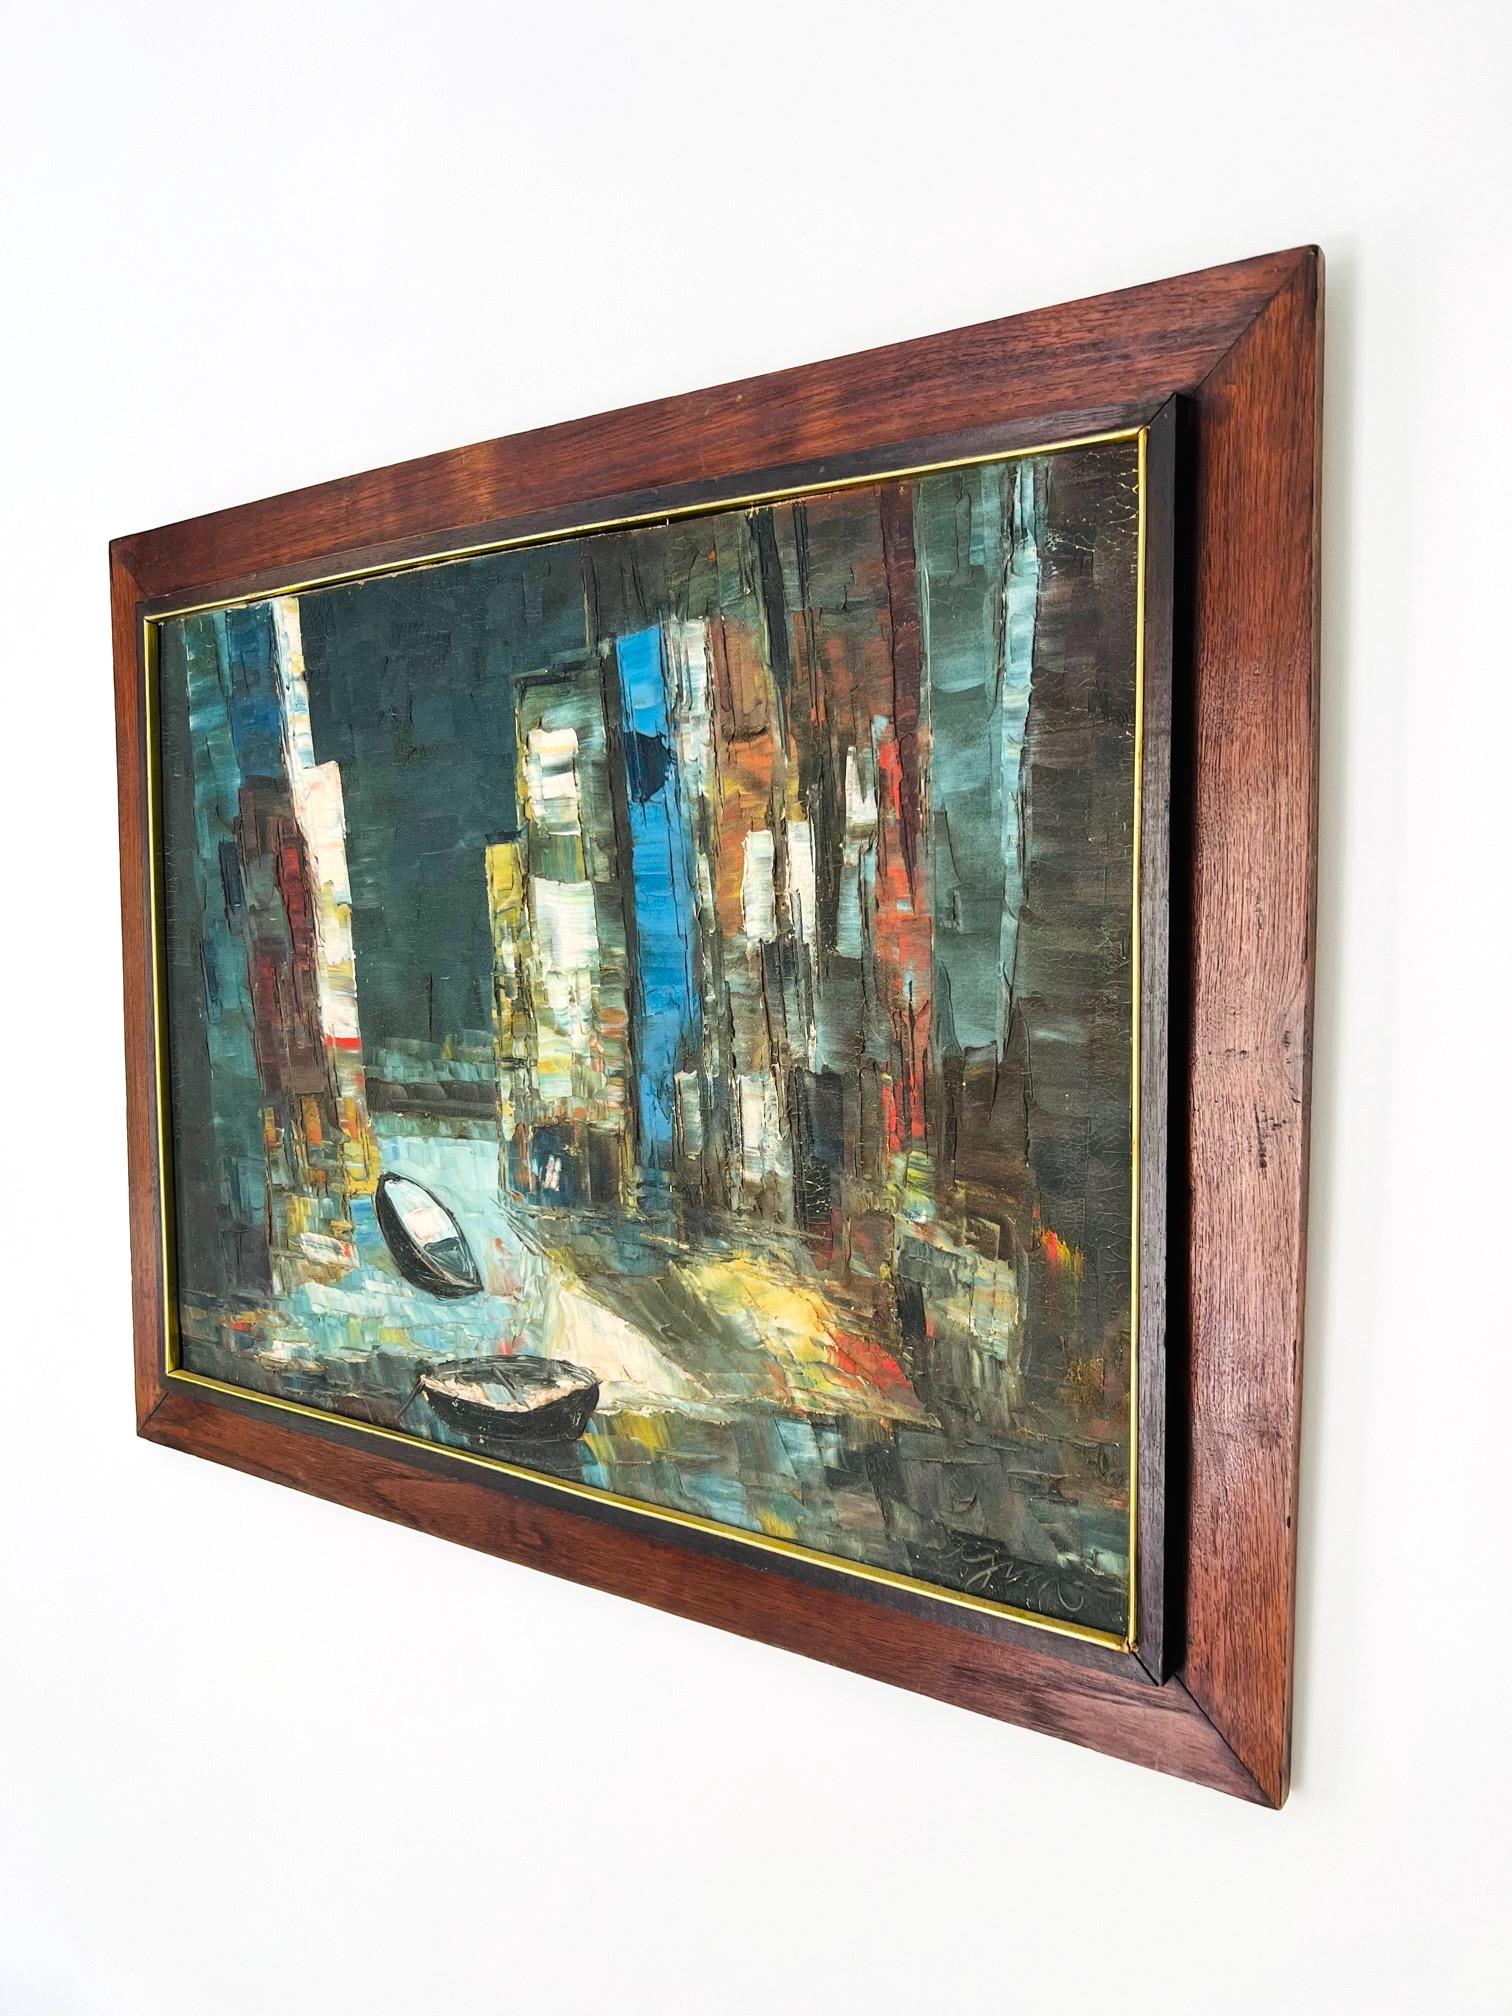 Abstract Painting in Original Wood Frame, Rowboats Oil on Board, c. 1950s In Good Condition For Sale In Fort Lauderdale, FL